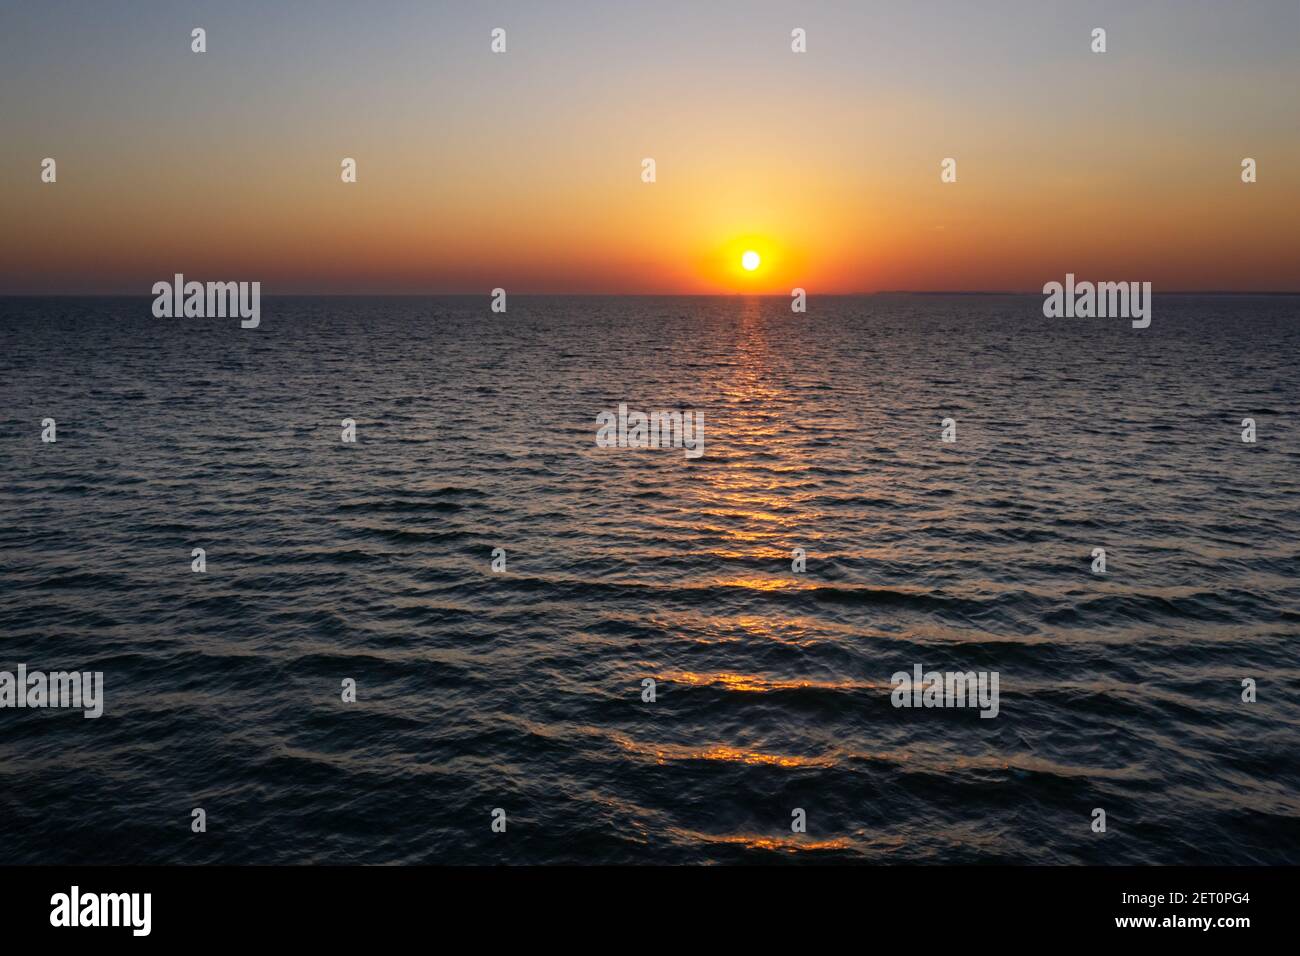 Sunset in the ocean with large sun dusk soft waves and red cloudy sky. Sea sunrise background. Landscape photography Stock Photo